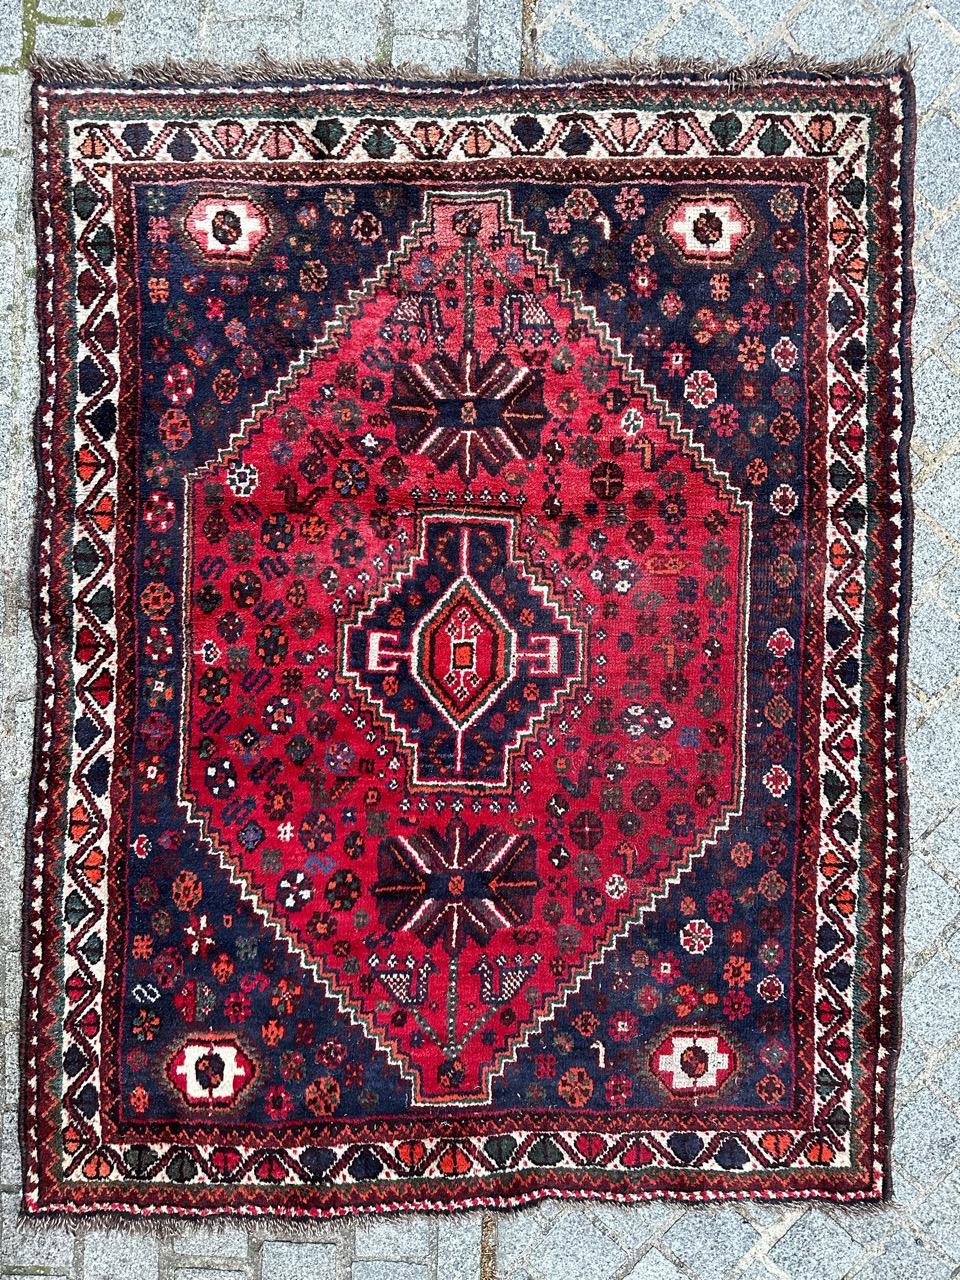 Beautiful vintage Shiraz rug from the second half of the 20th century, entirely hand-knotted in wool on wool. This exquisite piece features intricate geometric and stylized designs in lovely colors.

The field boasts a rich red background adorned